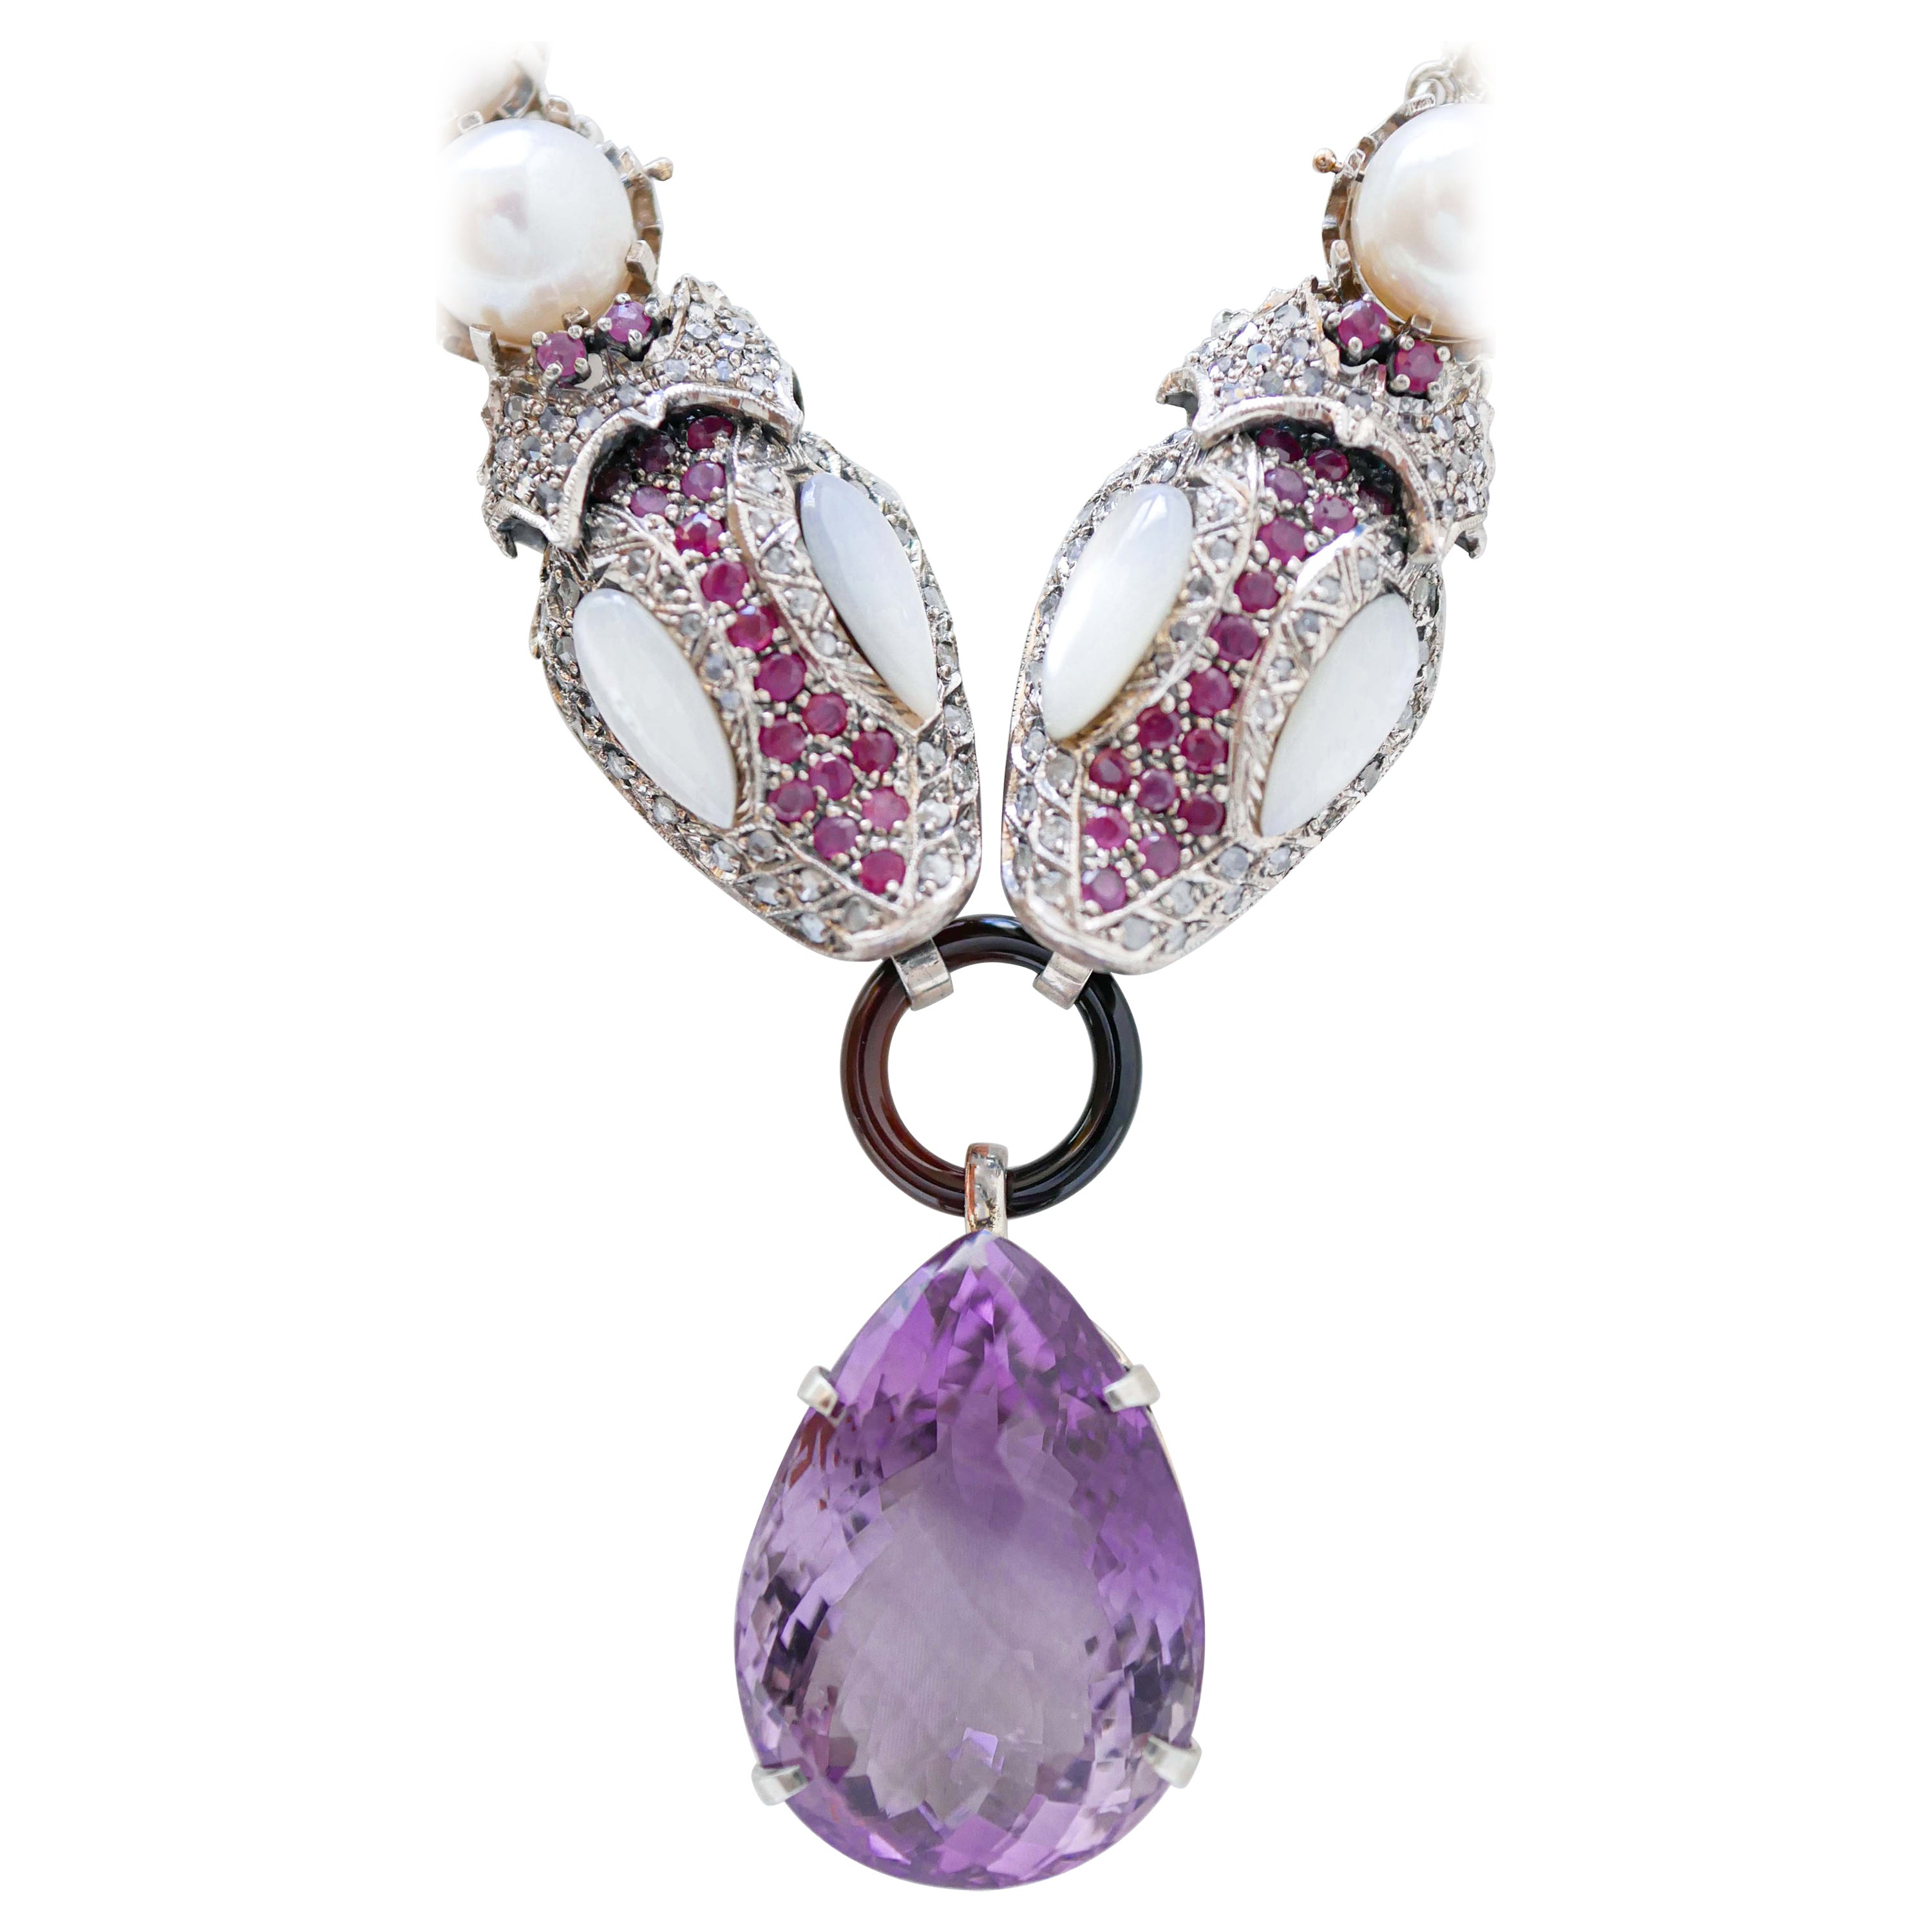 Amethyst, Rubies, Pearls, White Stones, Diamonds, Rose Gold and Silver Necklace. For Sale